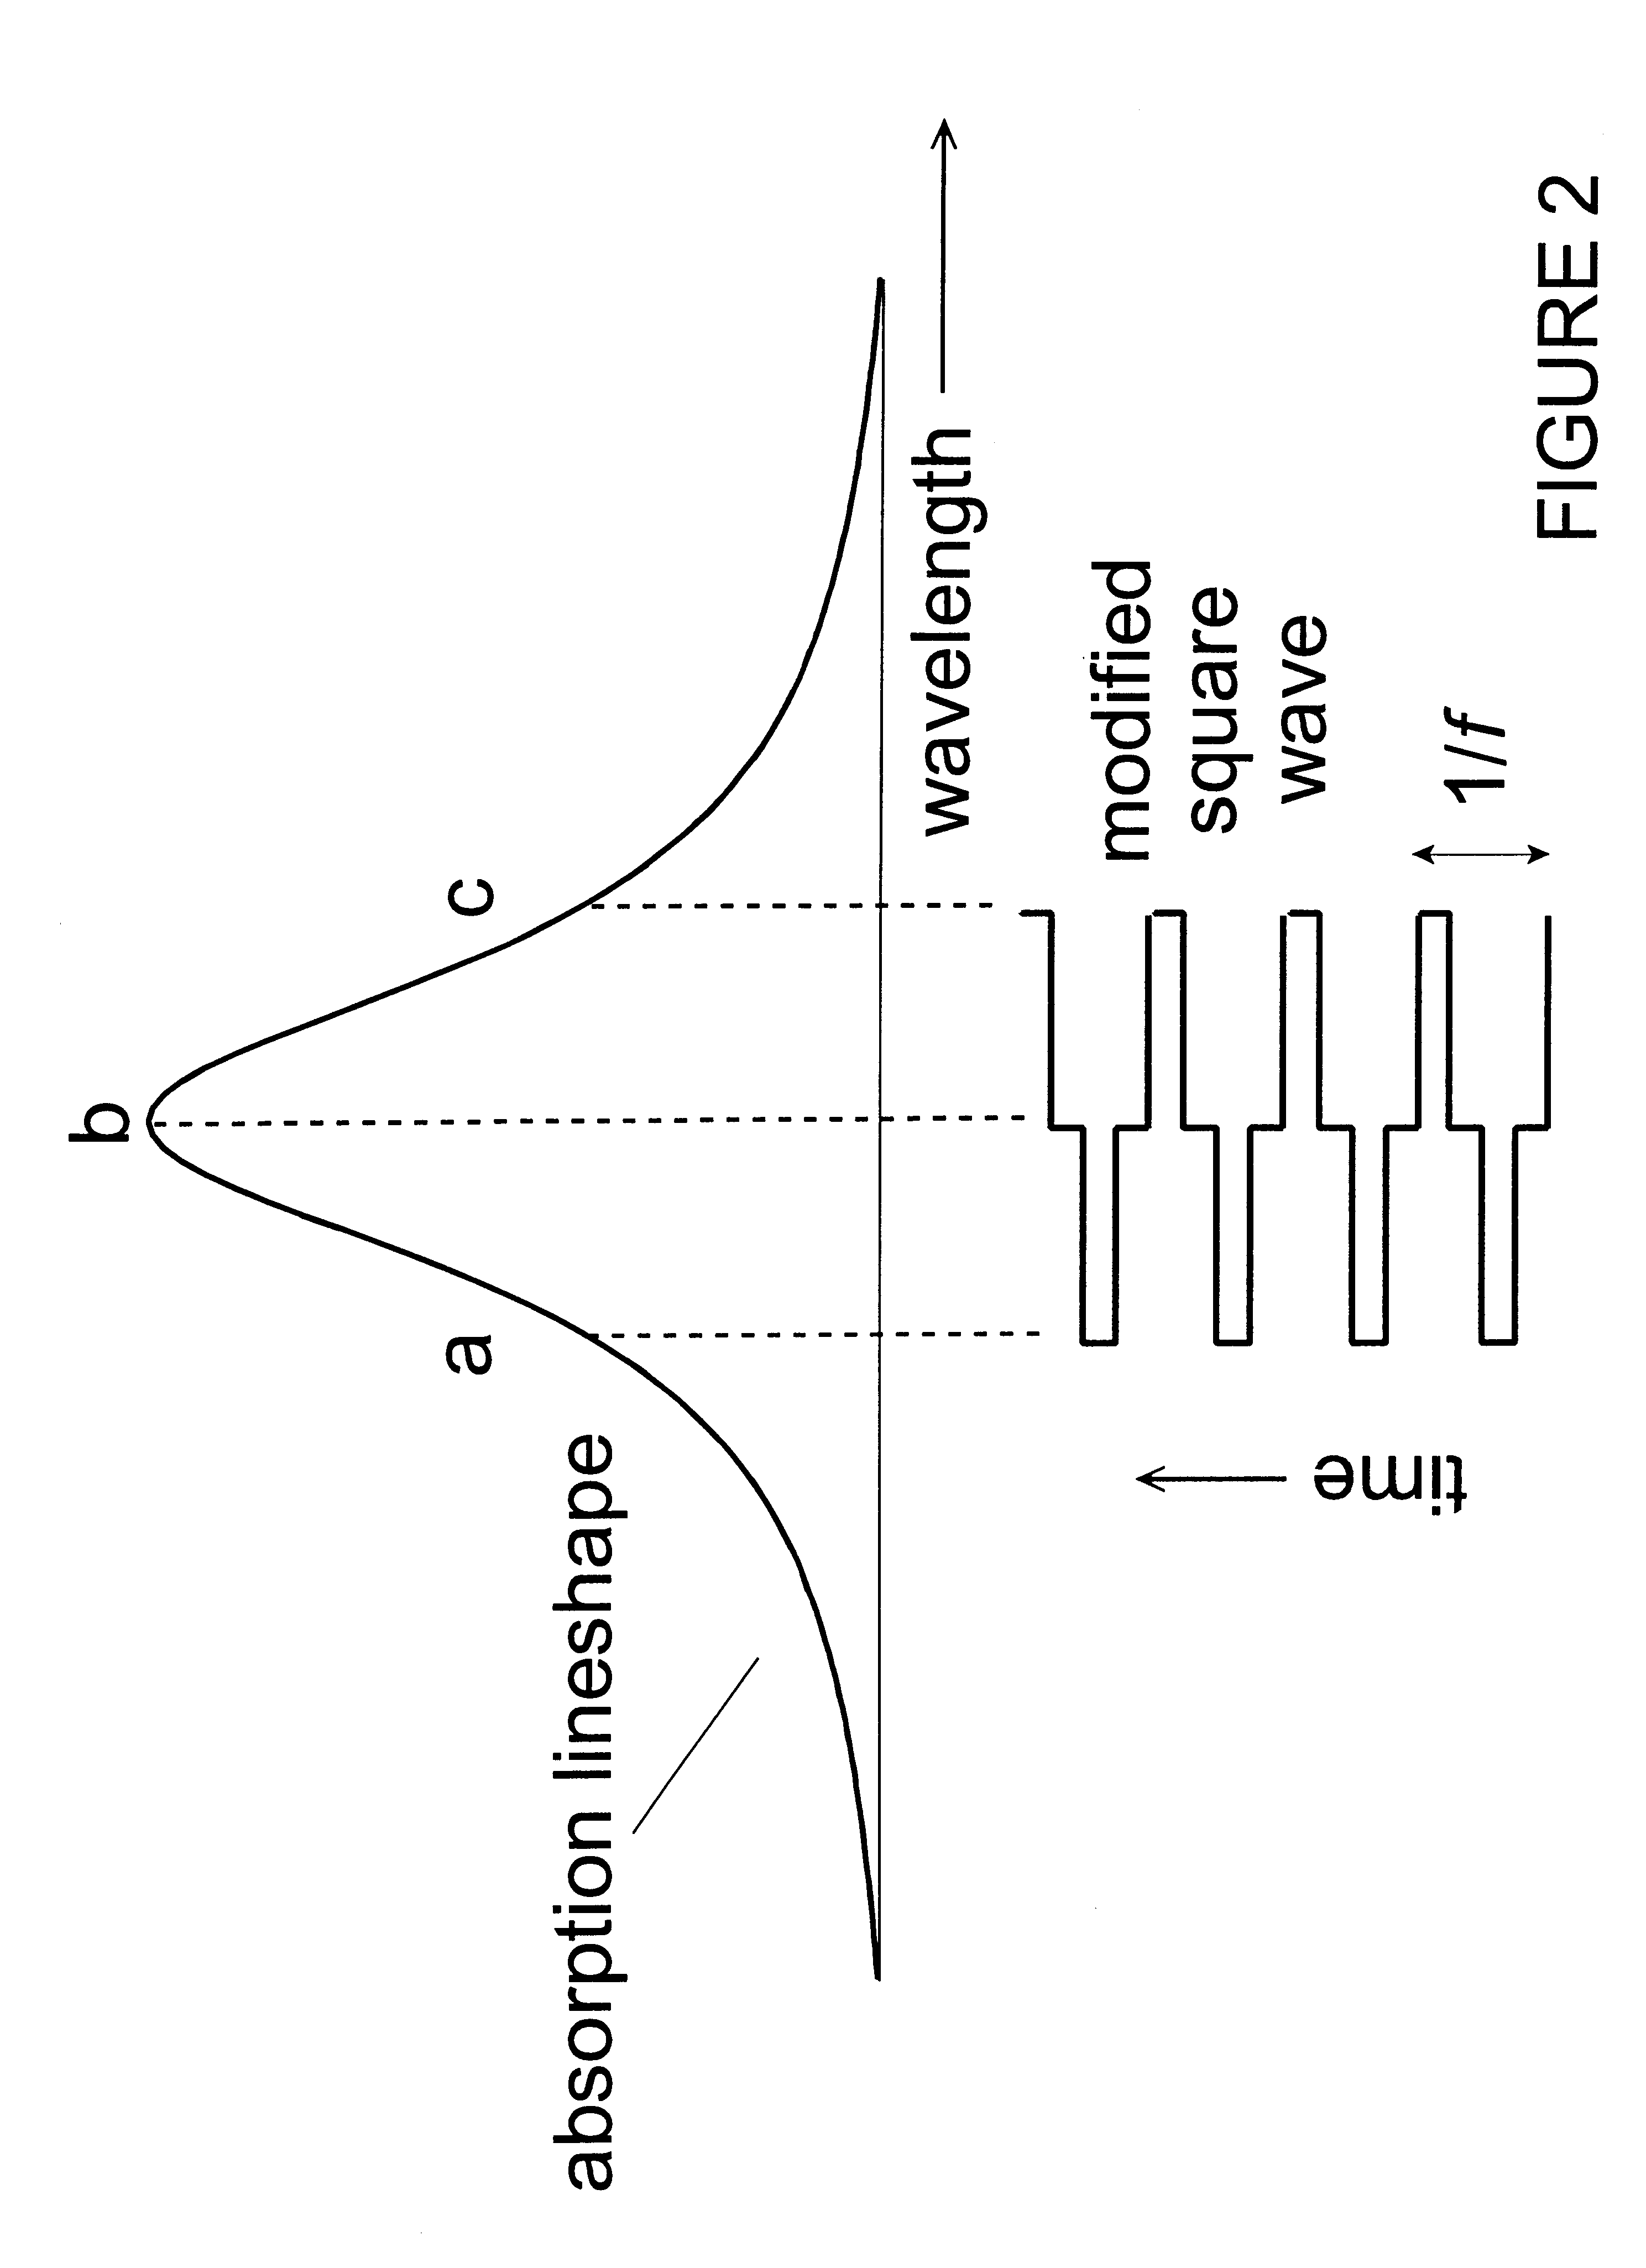 Wavelength modulated photoacoustic spectrometer